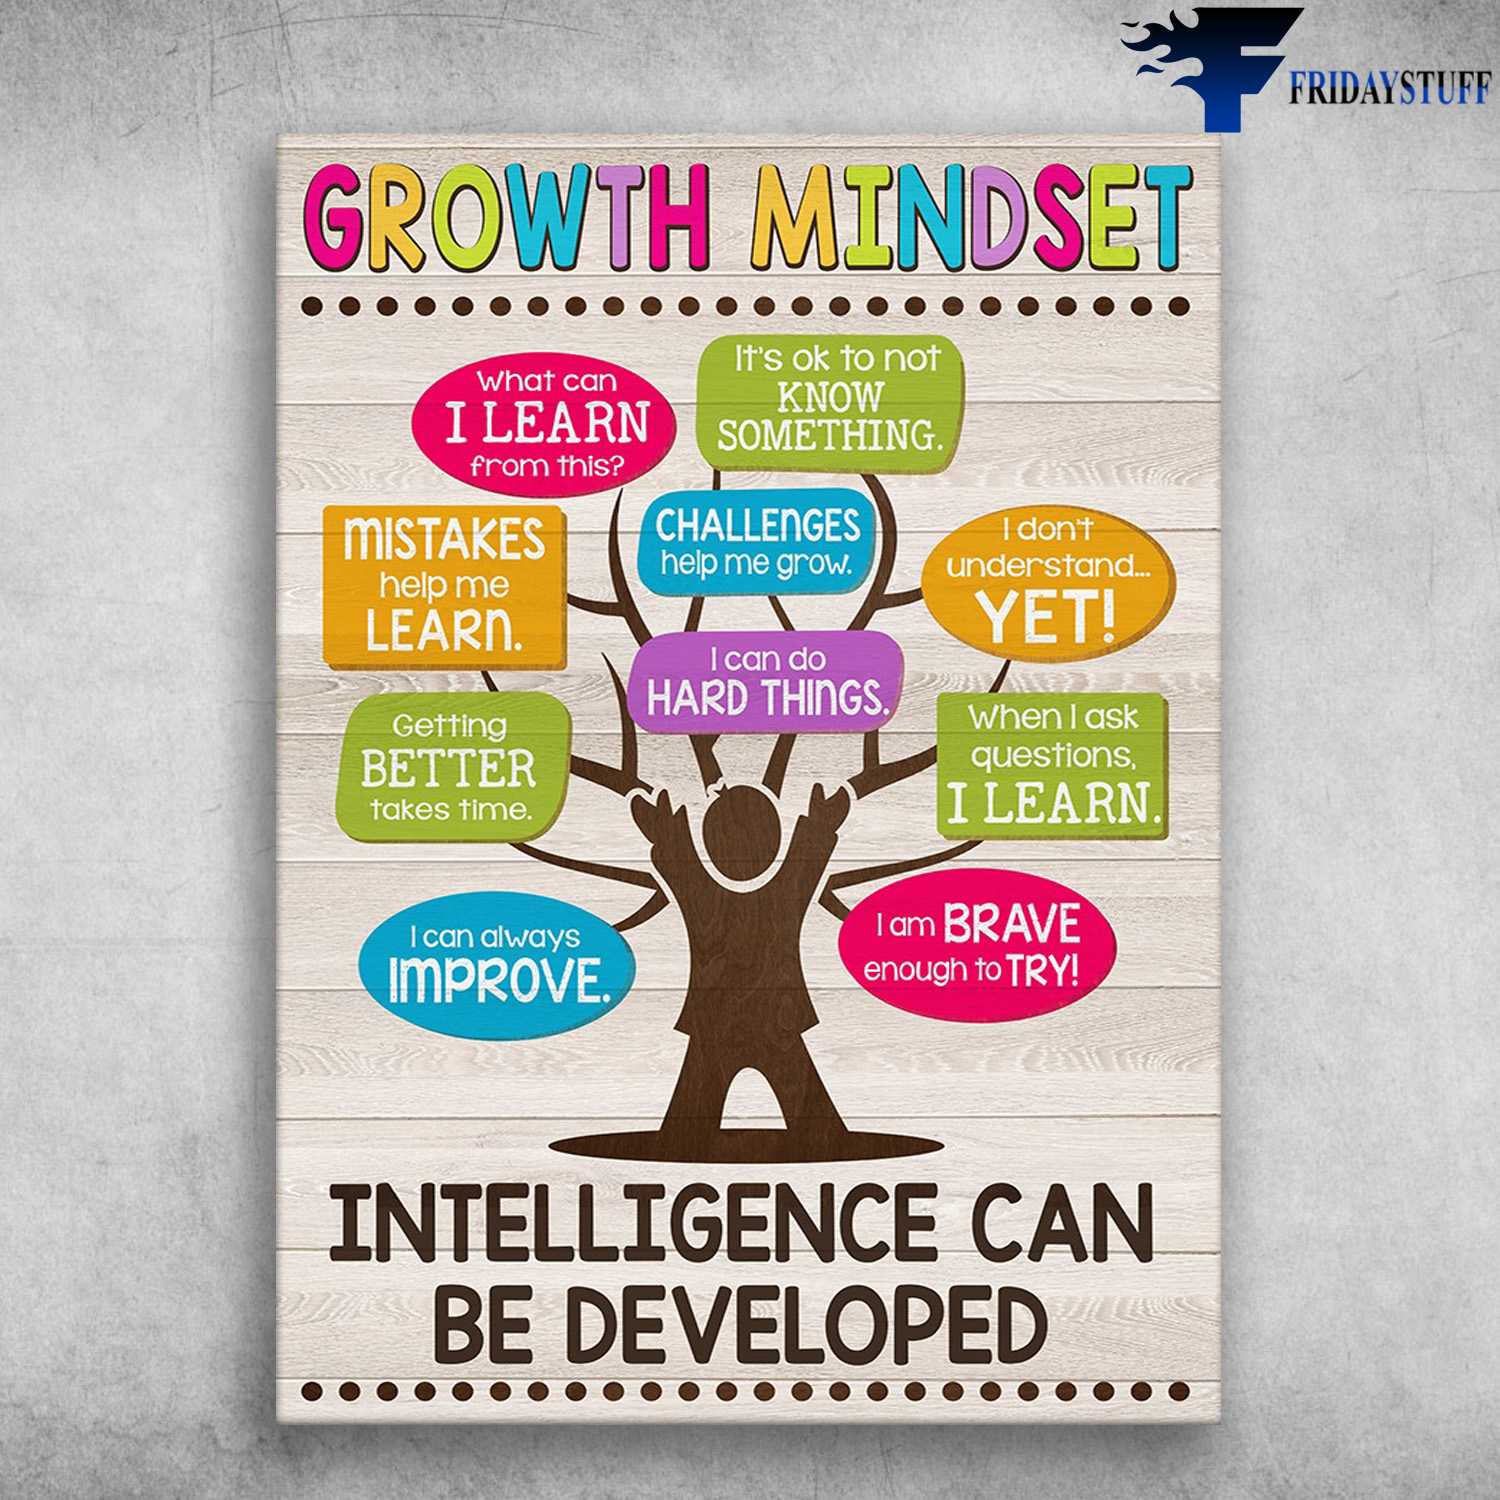 Growth Mindset - What Can I Learn From This, It's Ok To Not Know Something, Mistakes Help Me Learn, Getting Better Takes Time, I Can Always Improve, Intelligence Can Be Developed